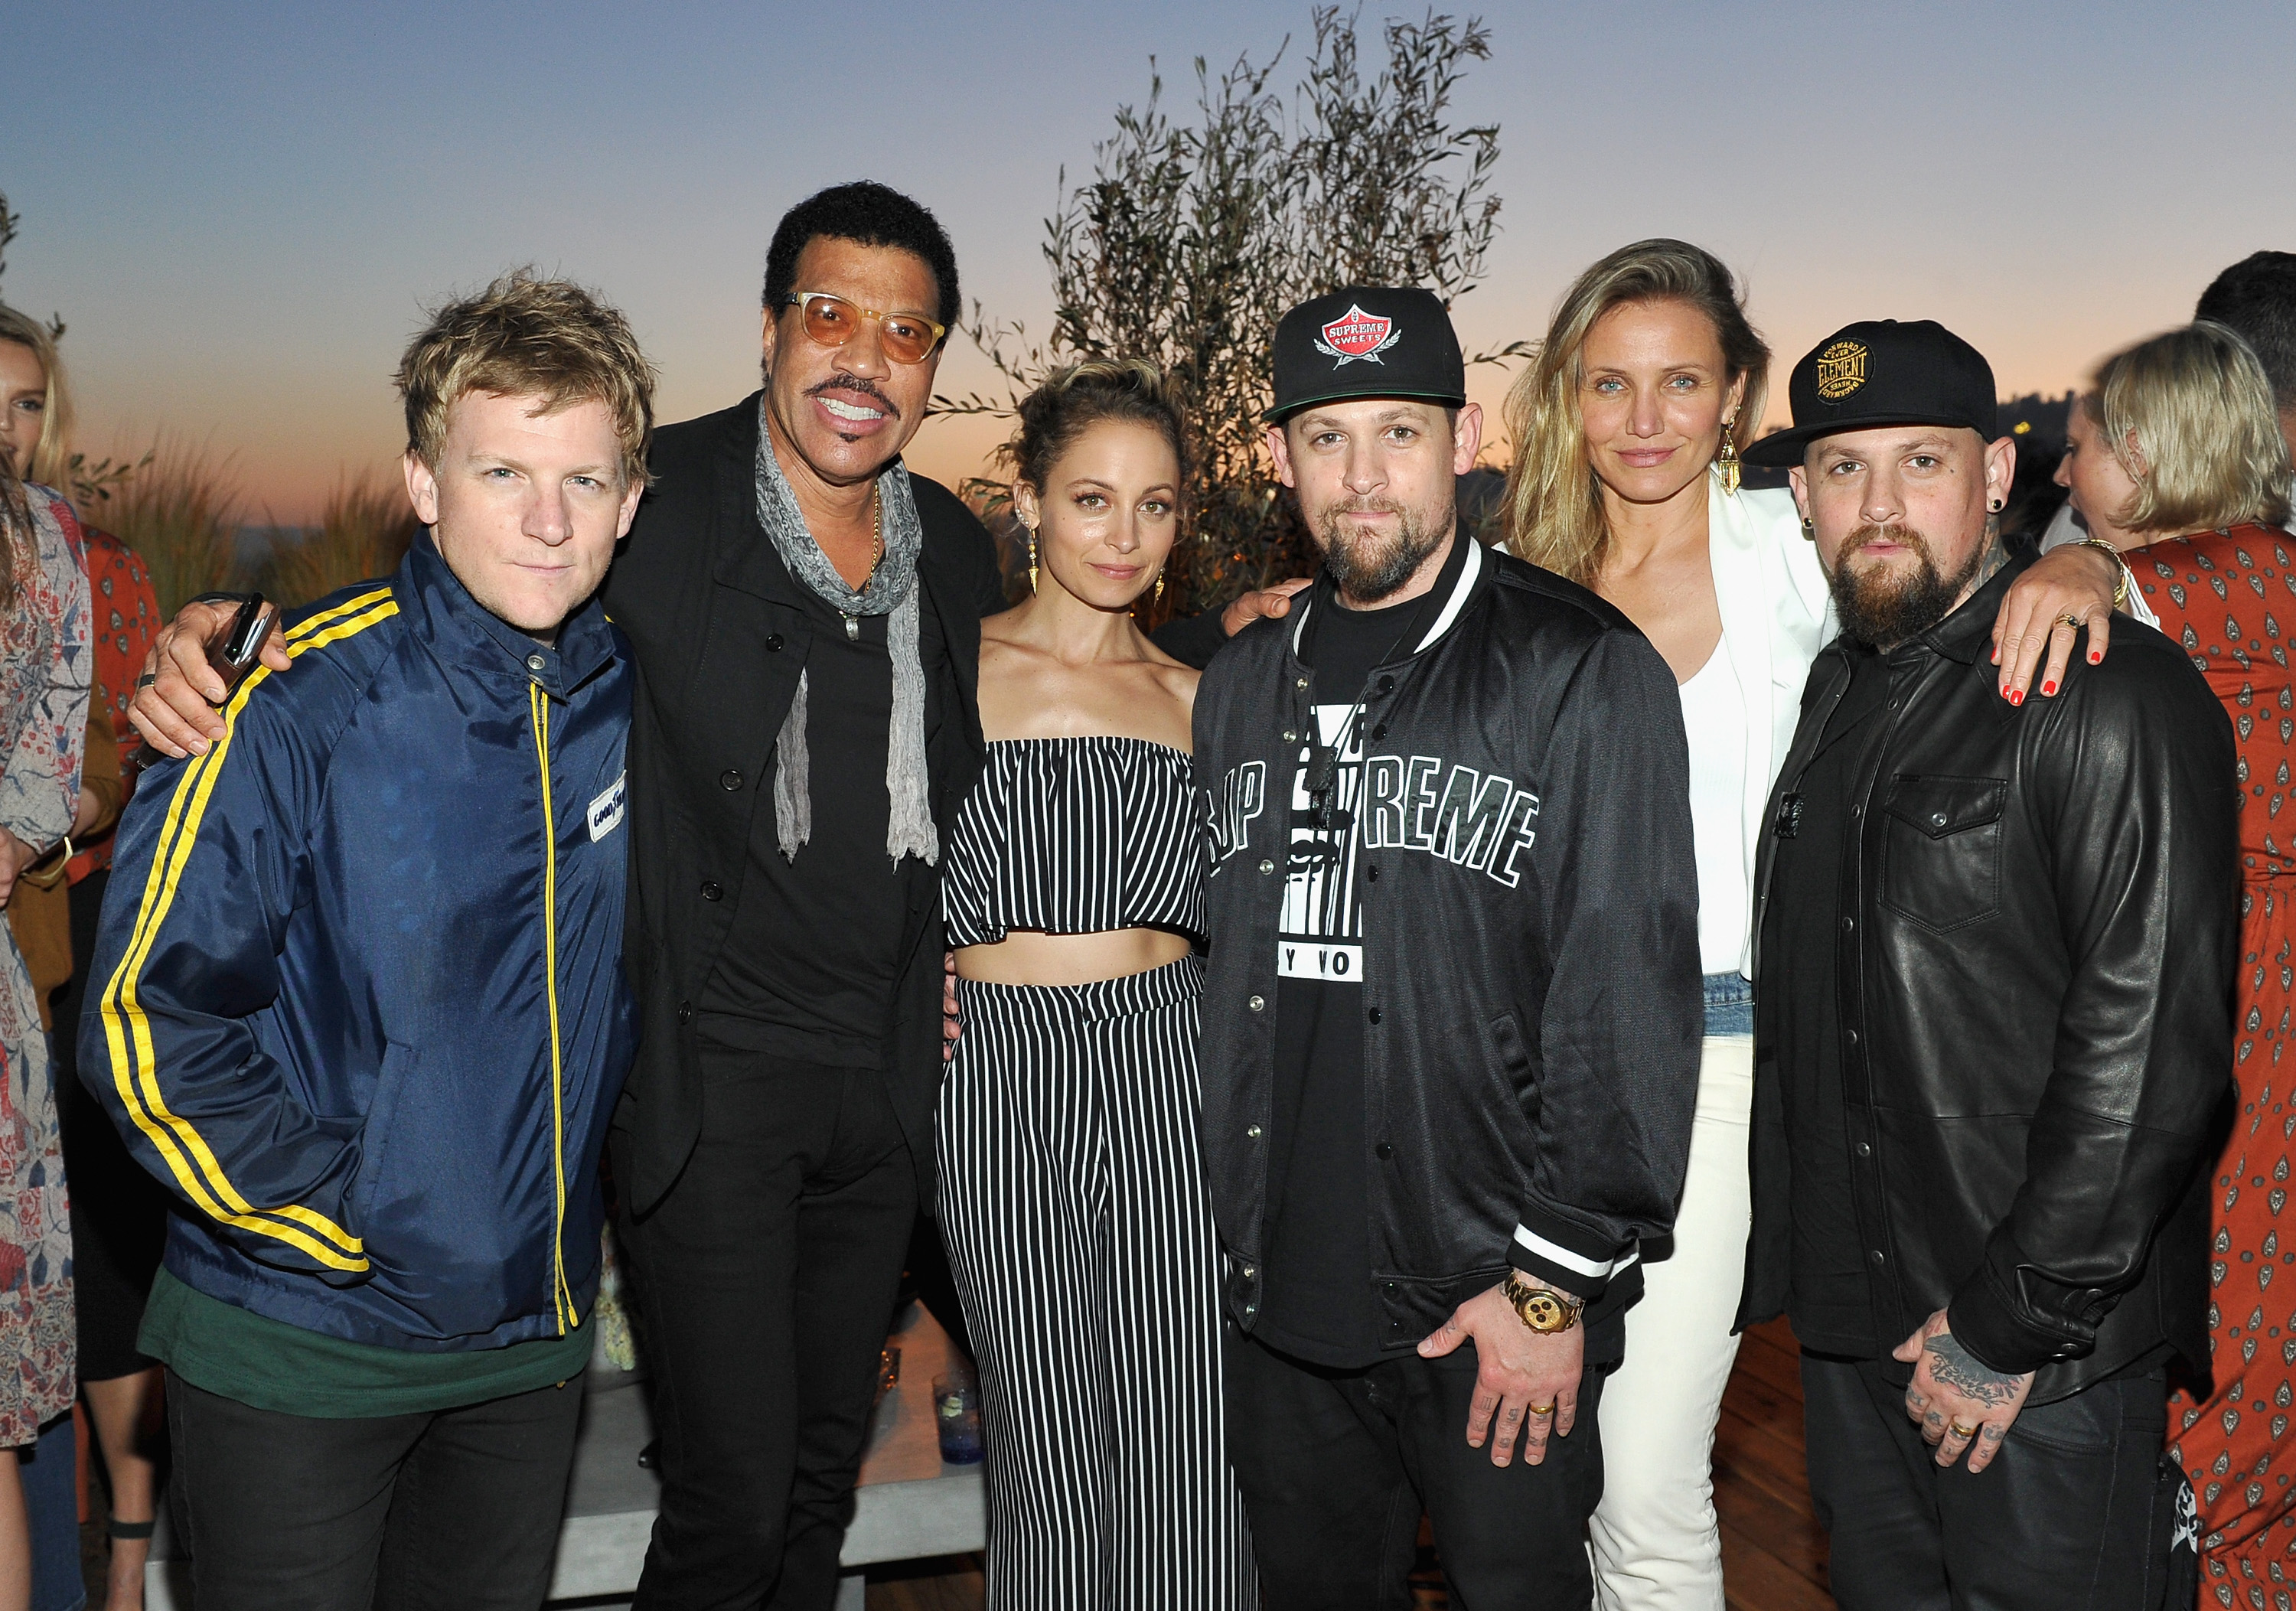 Josh Madden, Lionel Richie, Nicole Richie, Joel Madden, Cameron Diaz, and Benji Madden at House of Harlow 1960 x REVOLVE in Los Angeles, California on June 2, 2016 | Source: Getty Images